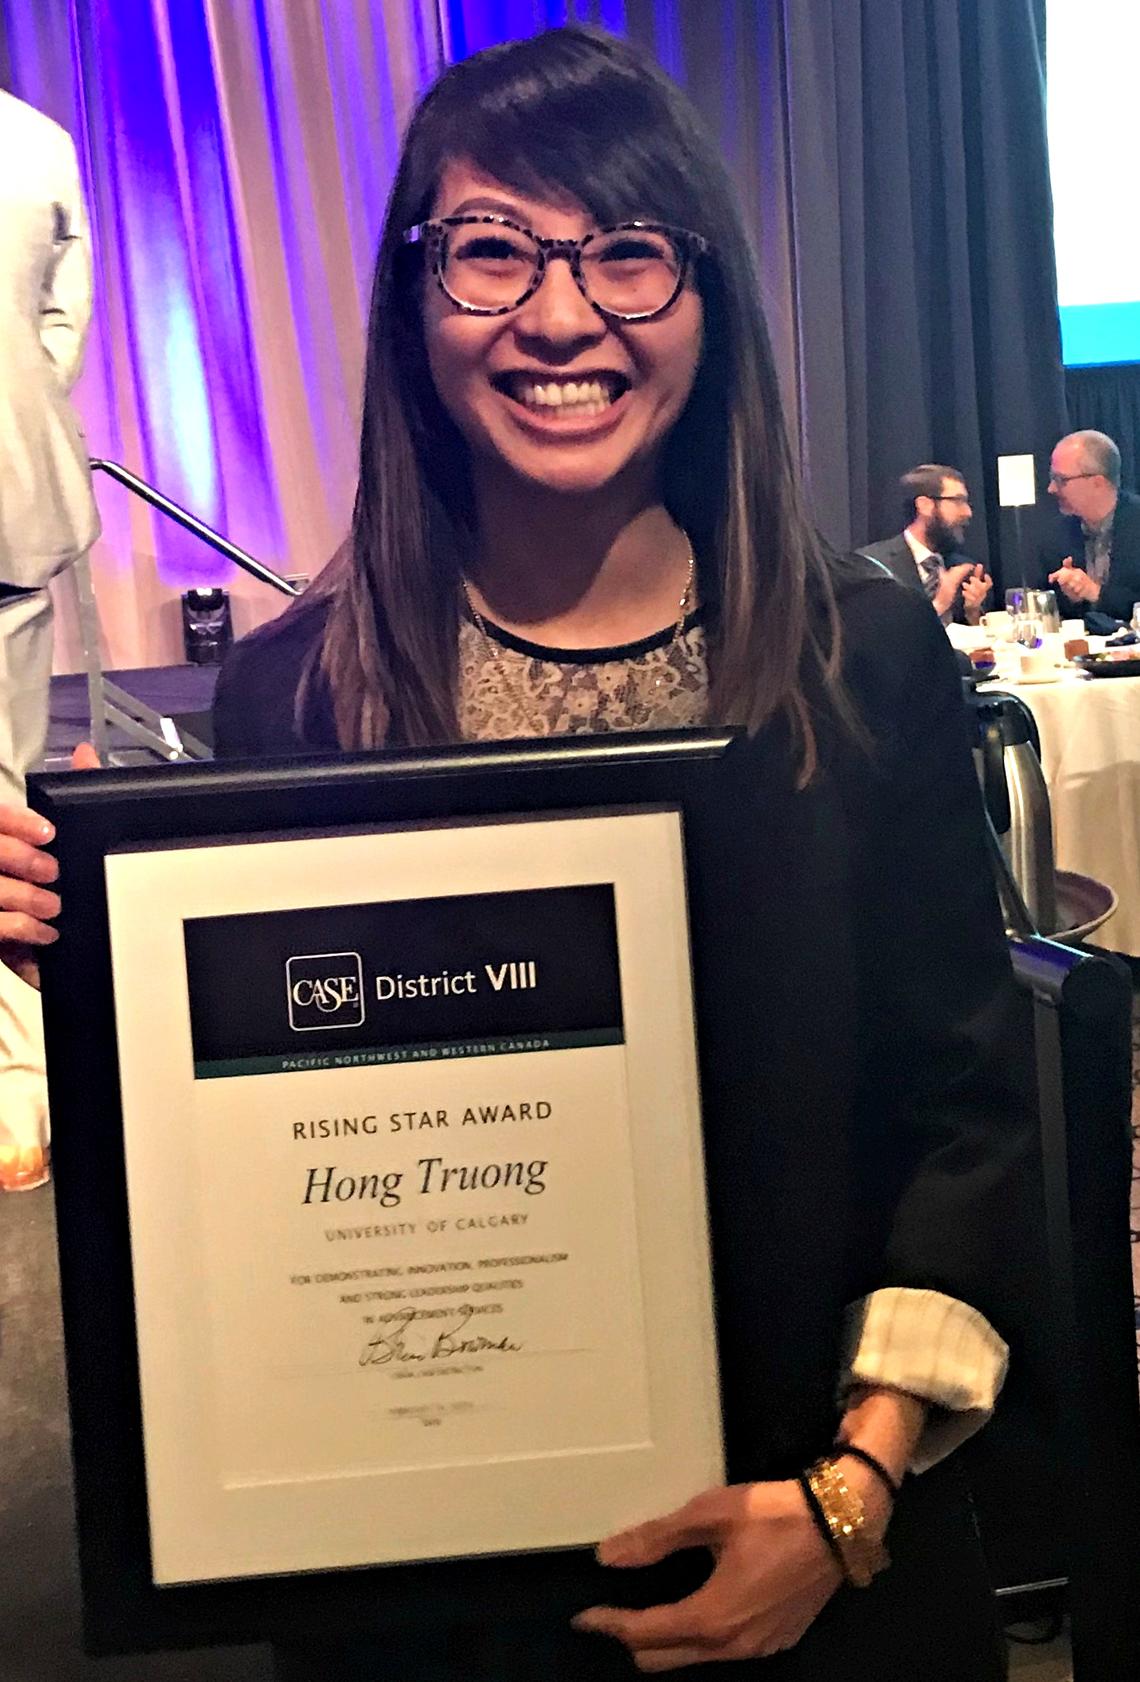 Hong Truong, event data co-ordinator for Development and Alumni Engagement, is all smiles at the CASE awards lunch on Feb. 14, 2019, after winning the Rising Star Award.